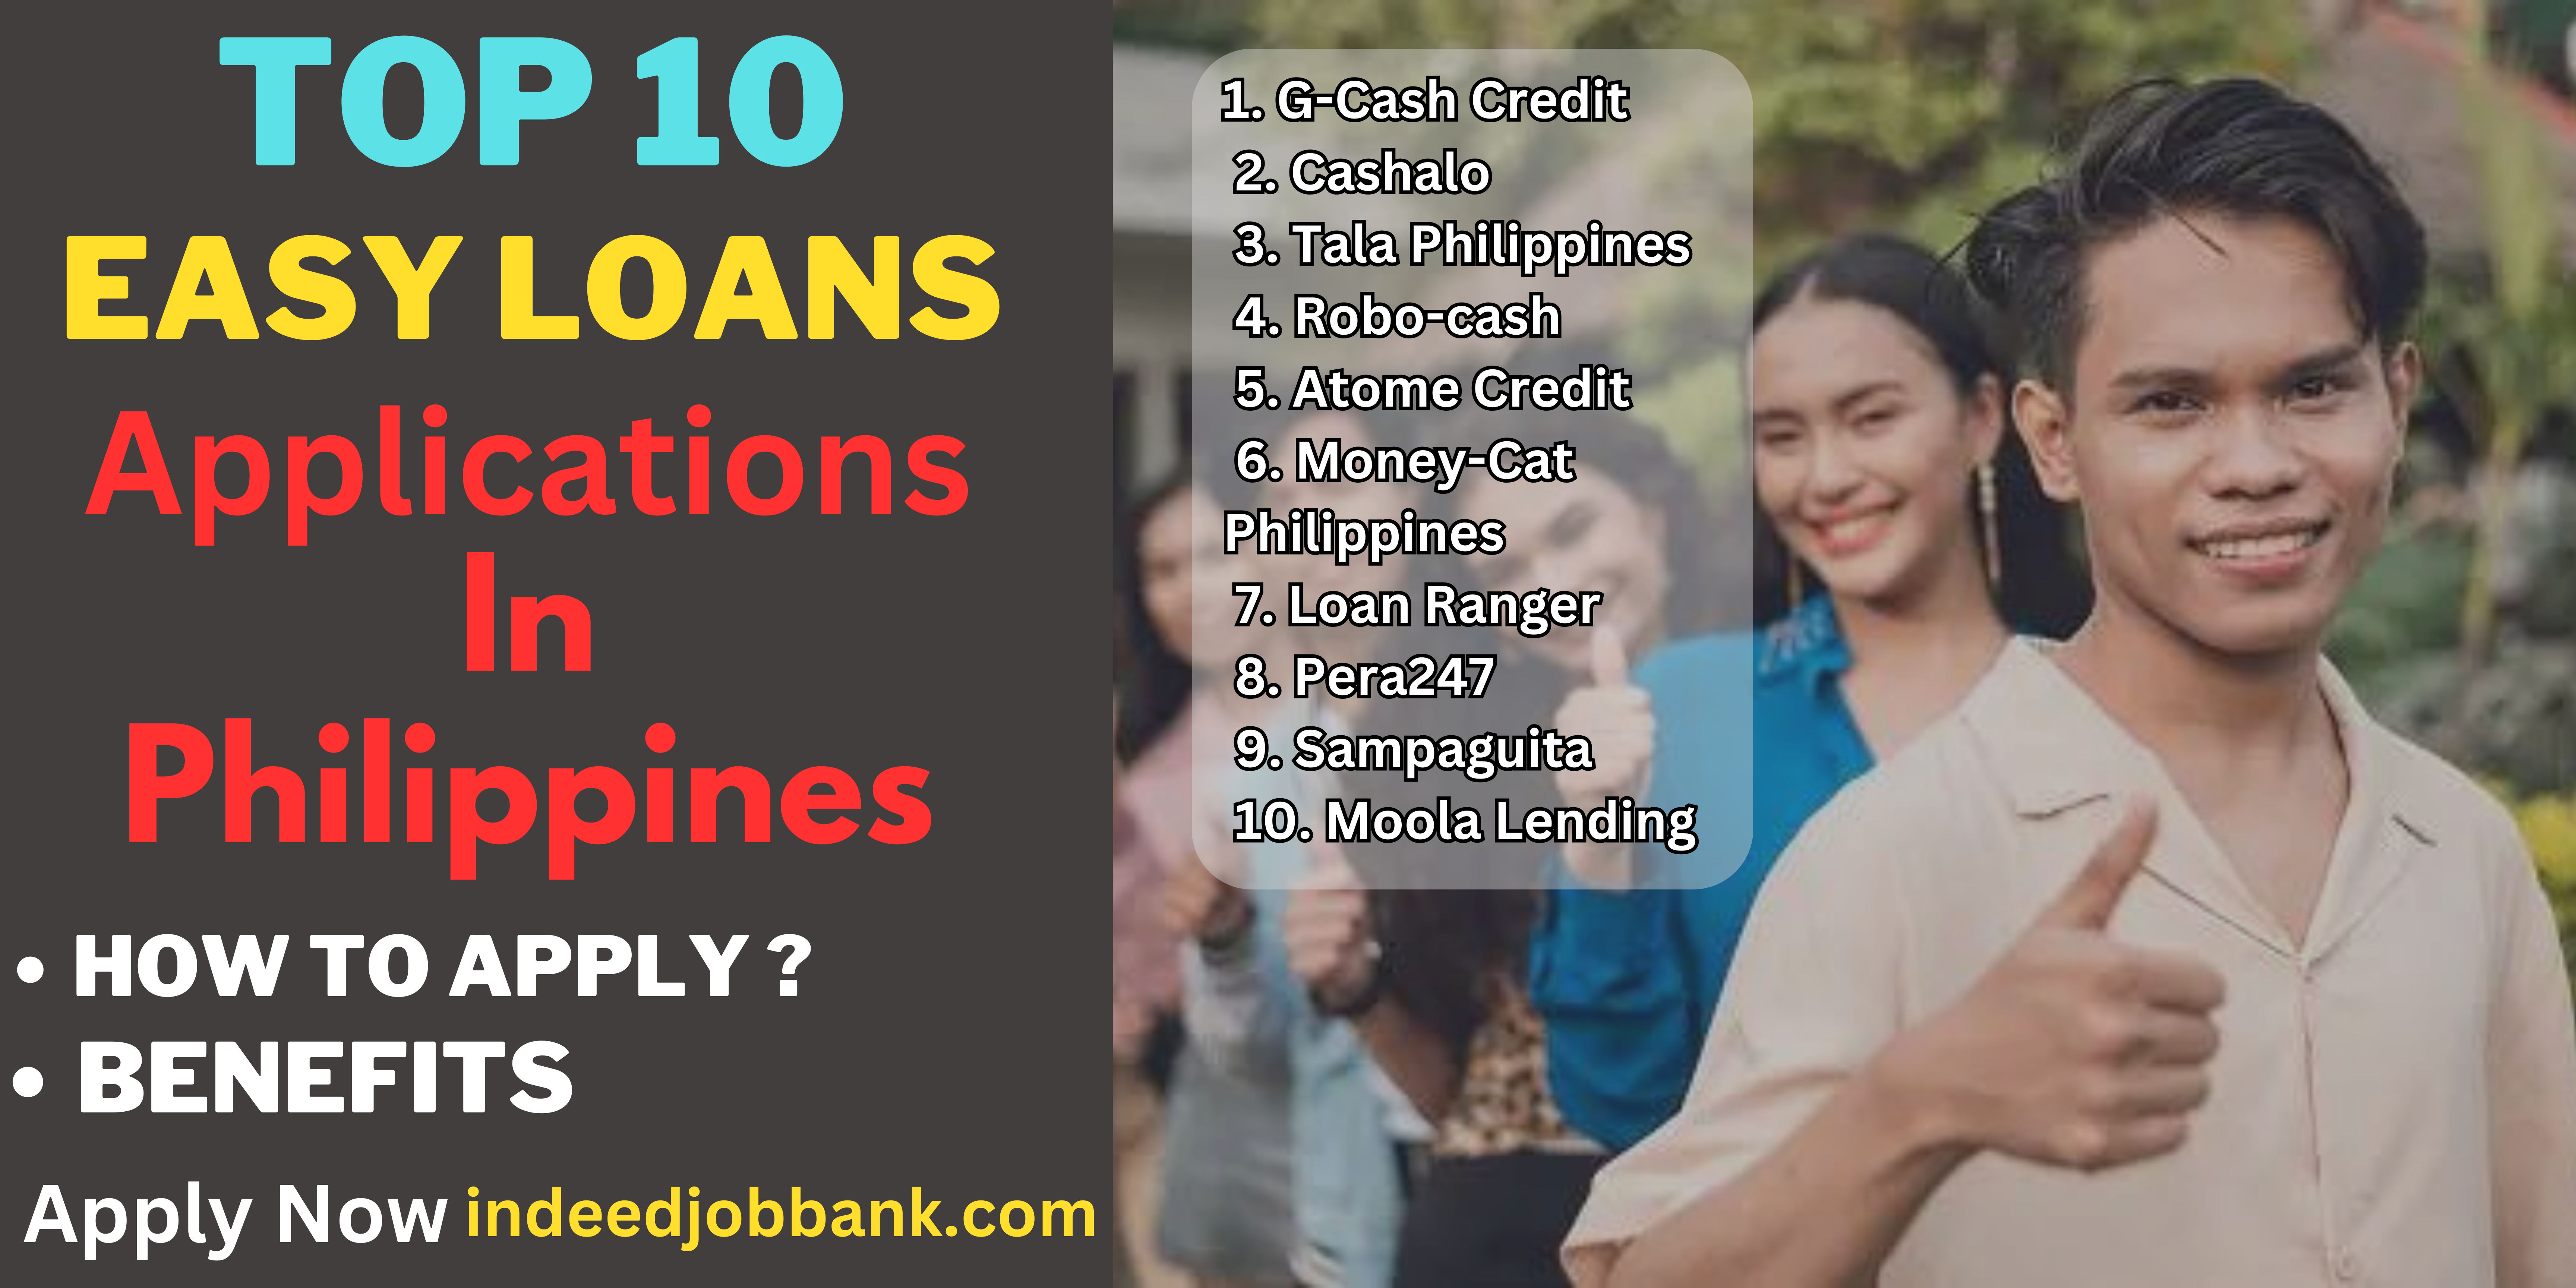 Top 10 Easy Loan Applications in the Philippines